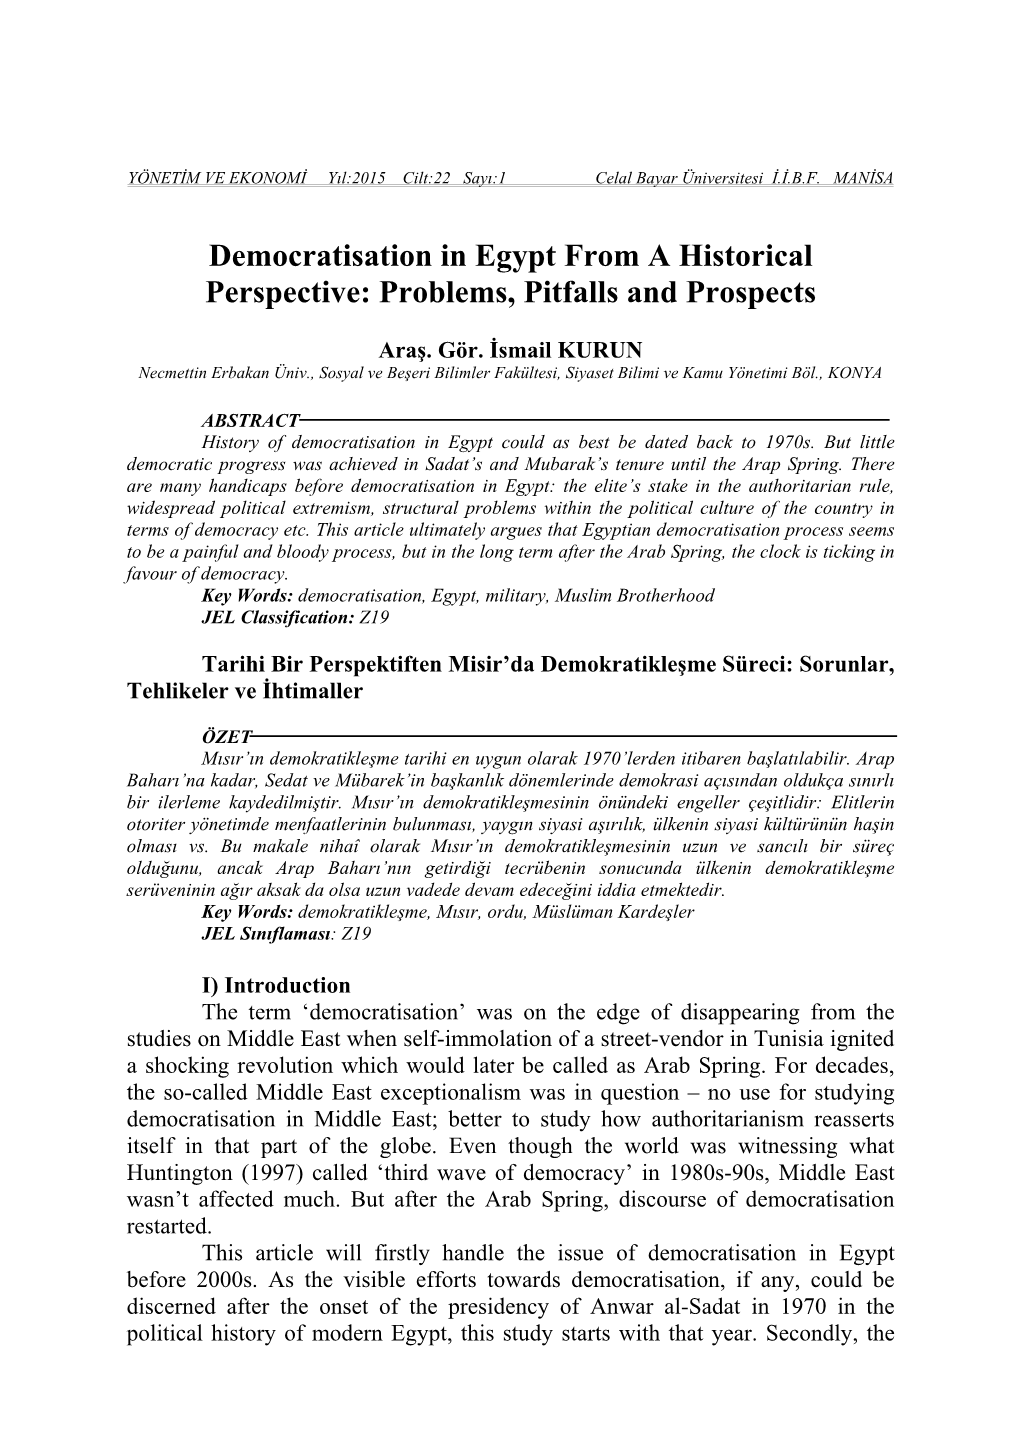 Democratisation in Egypt from a Historical Perspective: Problems, Pitfalls and Prospects